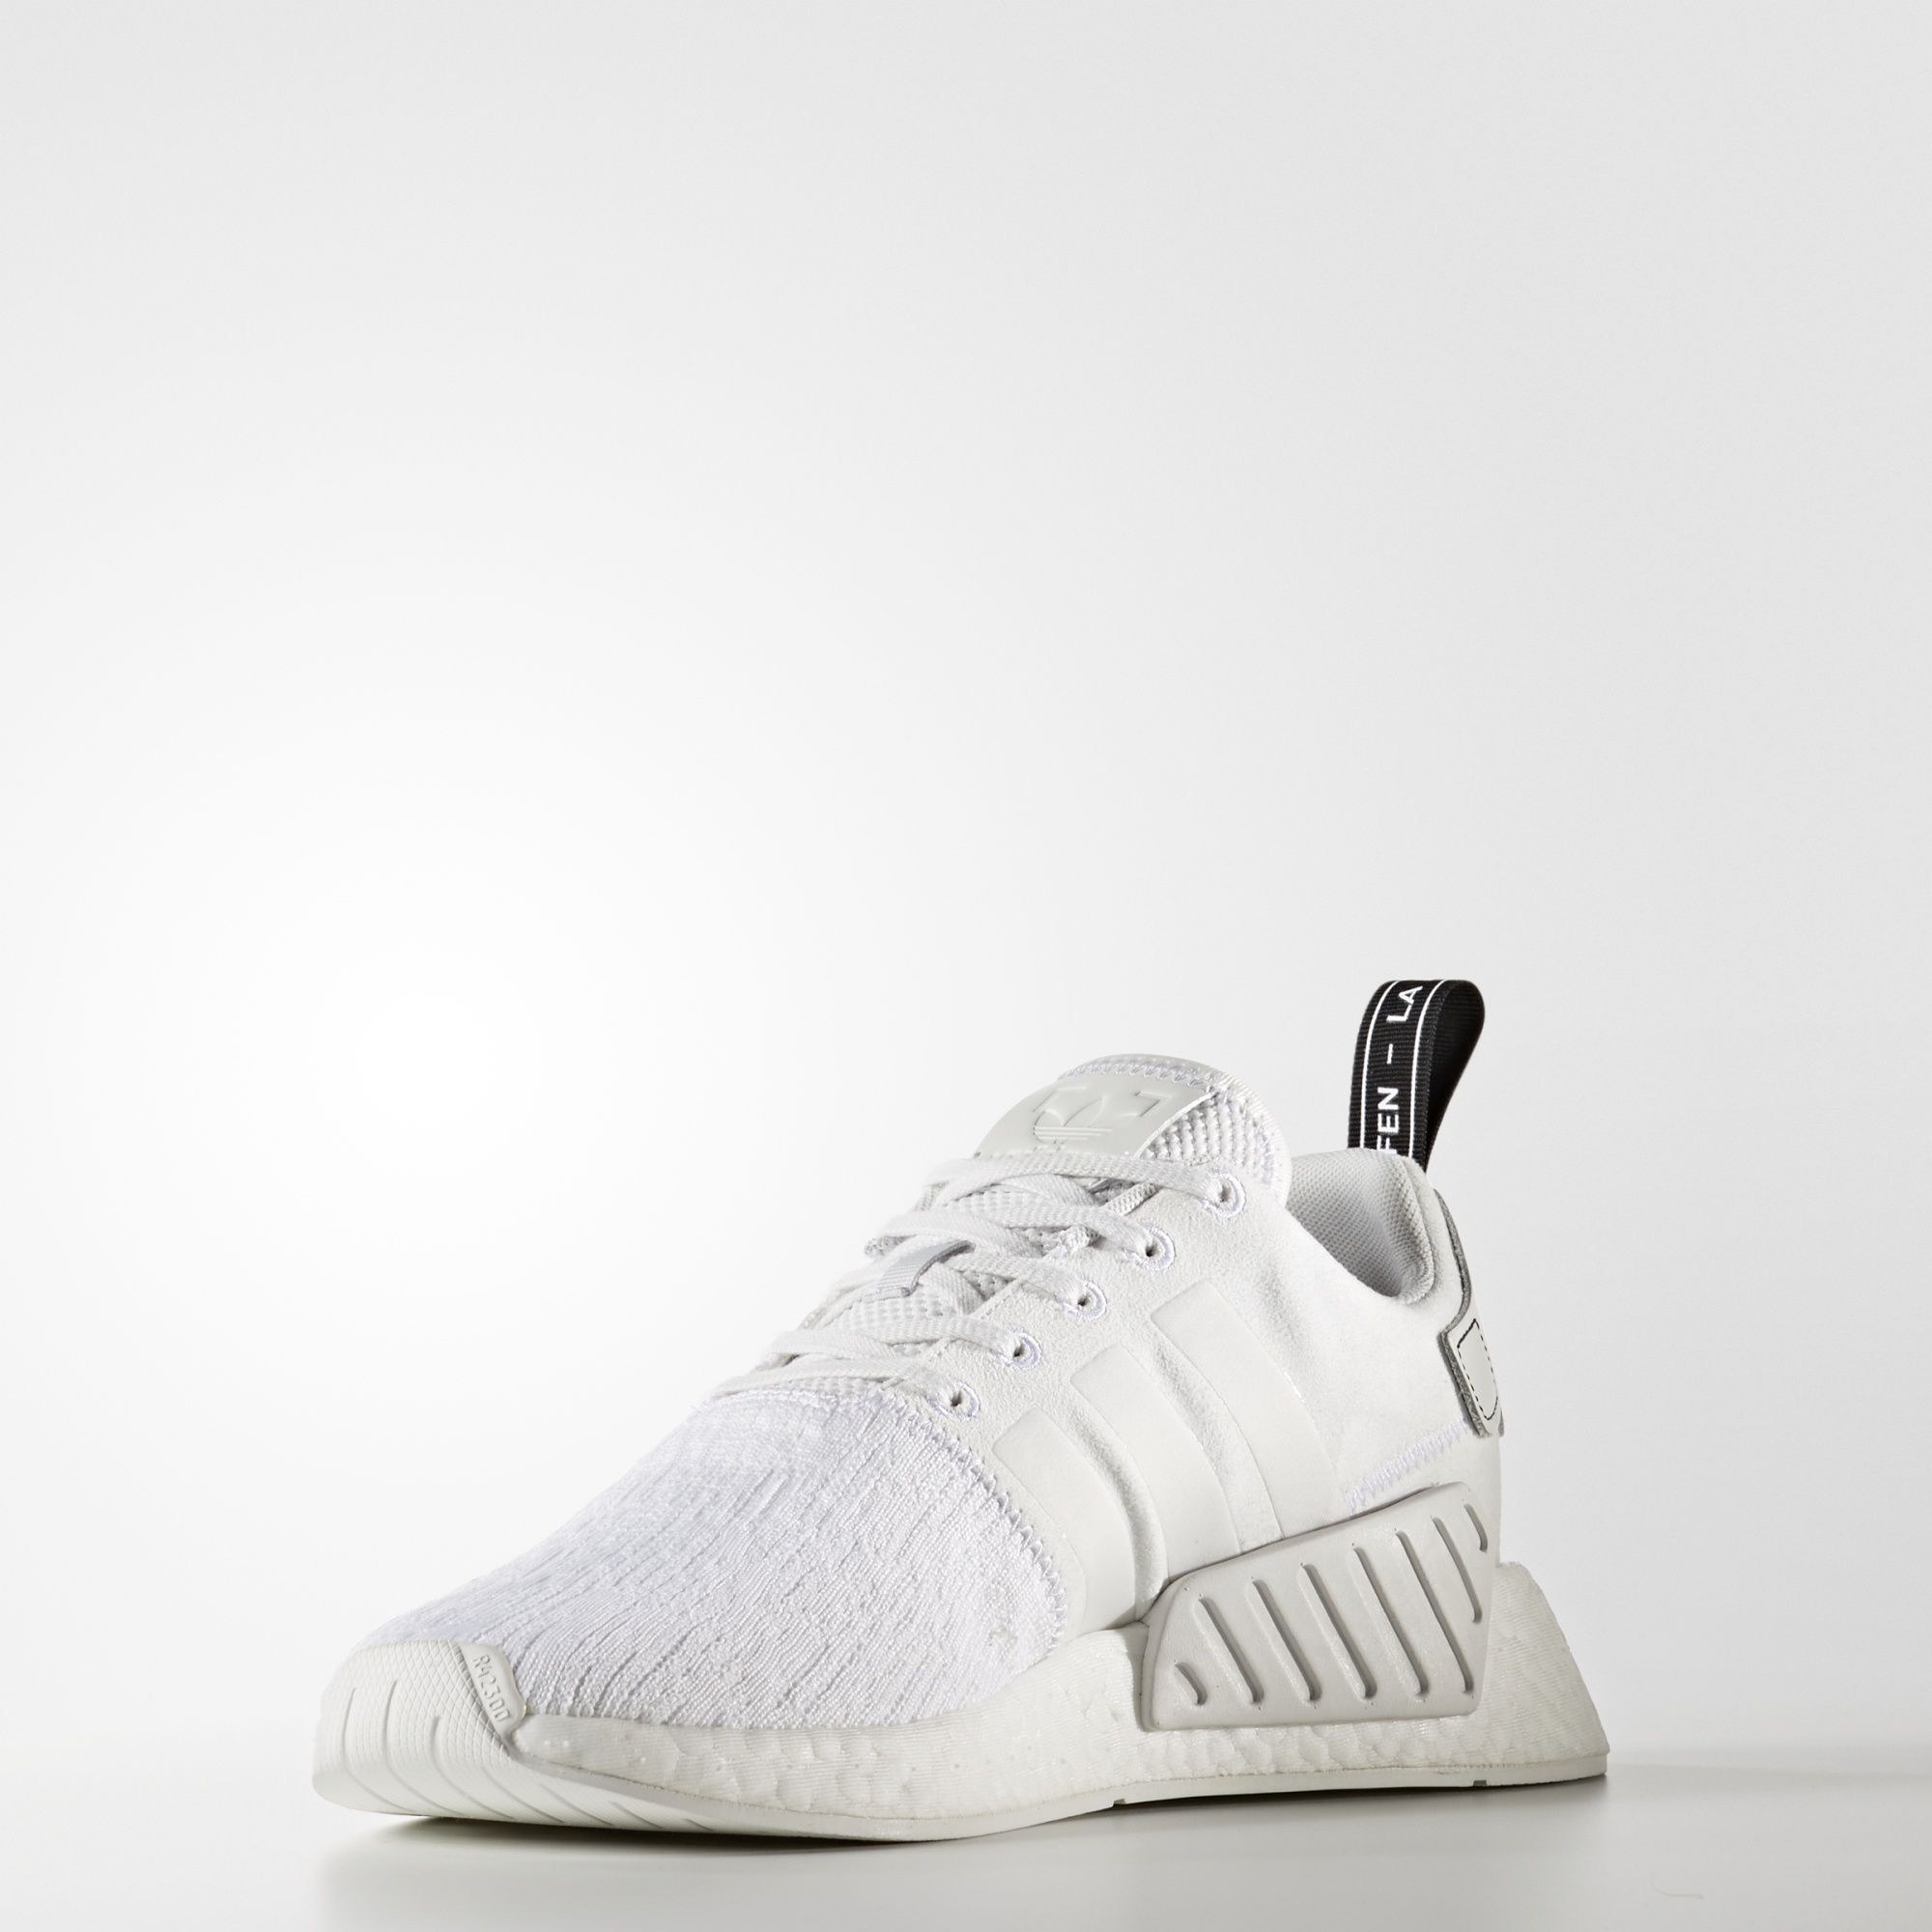 adidas nmd r2 homme blanche